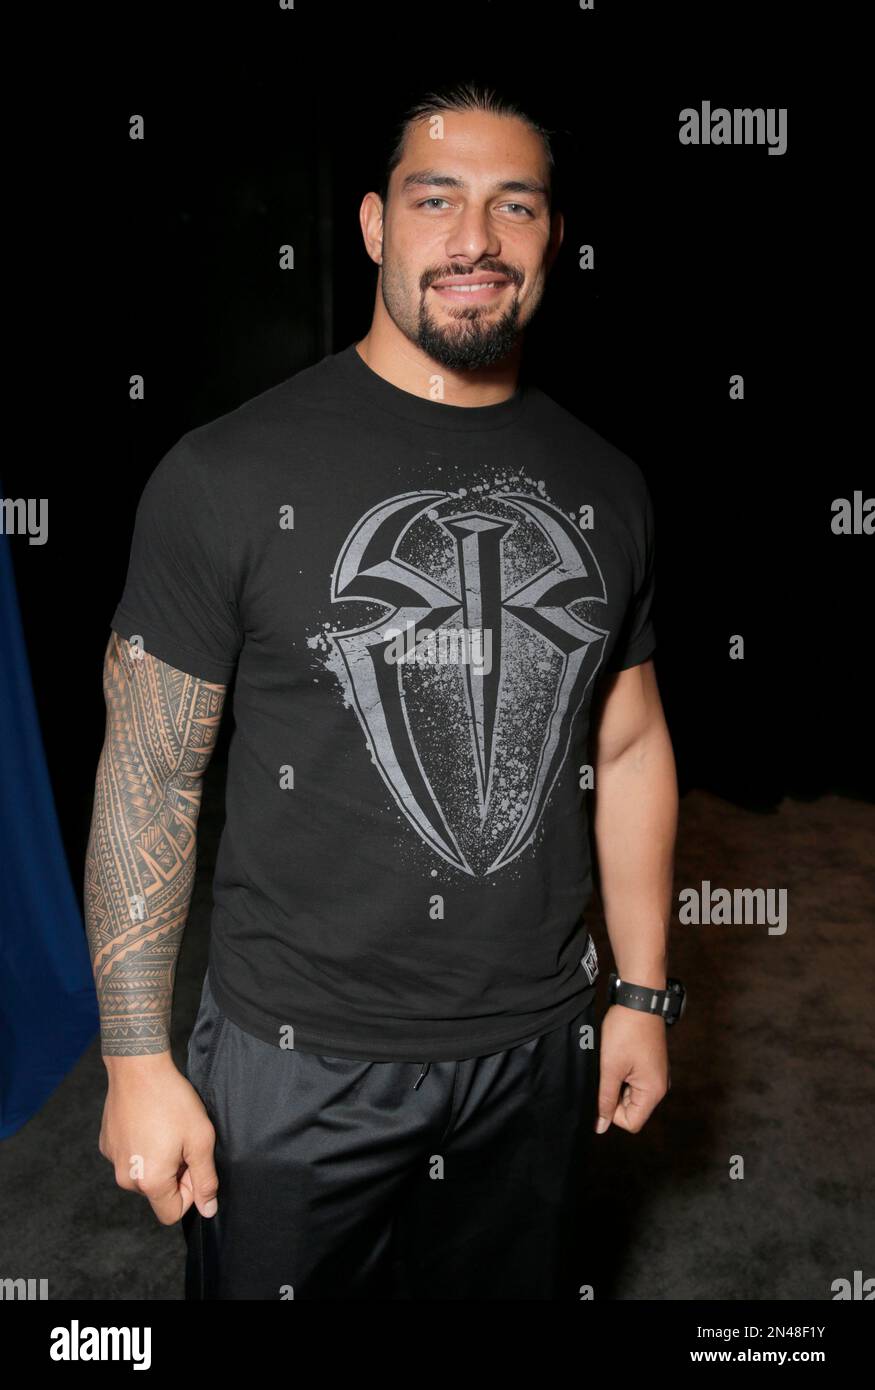 Roman Reigns shows off his new back tattoo 🤙 | Instagram